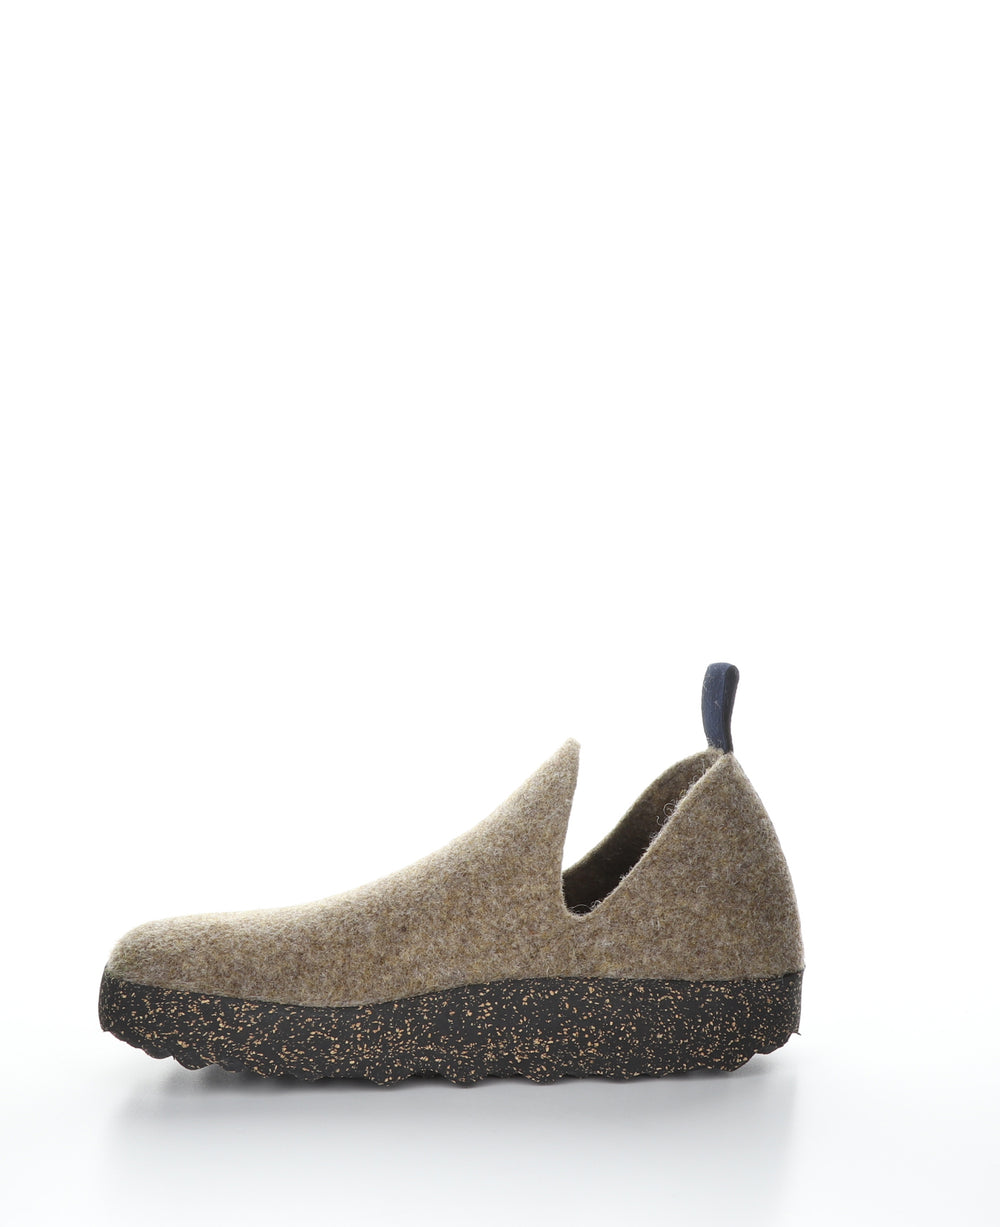 CITYM Taupe Round Toe Shoes|CITYM Chaussures à Bout Rond in Beige